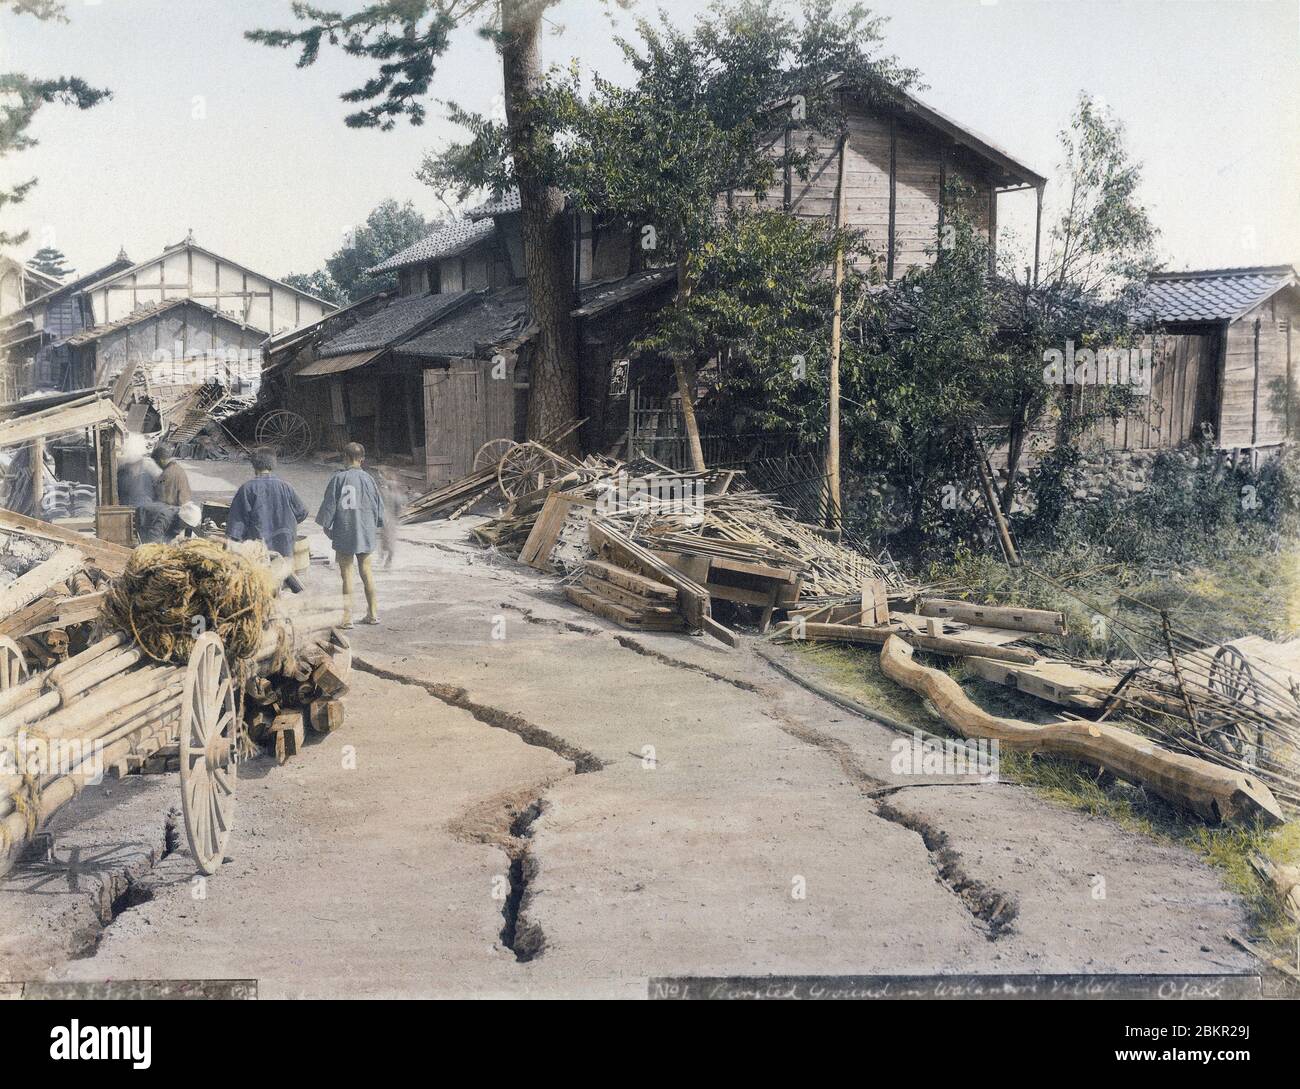 [ 1890s Japan - Nobi Earthquake ] —   Devastation in Ogaki Wakamori Village (大垣若森村) in Gifu Prefecture caused by the Nobi Earthquake (濃尾地震, Nobi Jishin) of October 28, 1891 (Meiji 24). Debris is piled up along a cracked road.  The Nobi Earthquake measured between 8.0 and 8.4 on the scale of Richter and caused 7,273 deaths, 17,175 casualties and the destruction of 142,177 homes.  The quake is also referred to as the Mino-Owari Earthquake (美濃尾張地震, Mino-Owari Jishin).  19th century vintage albumen photograph. Stock Photo